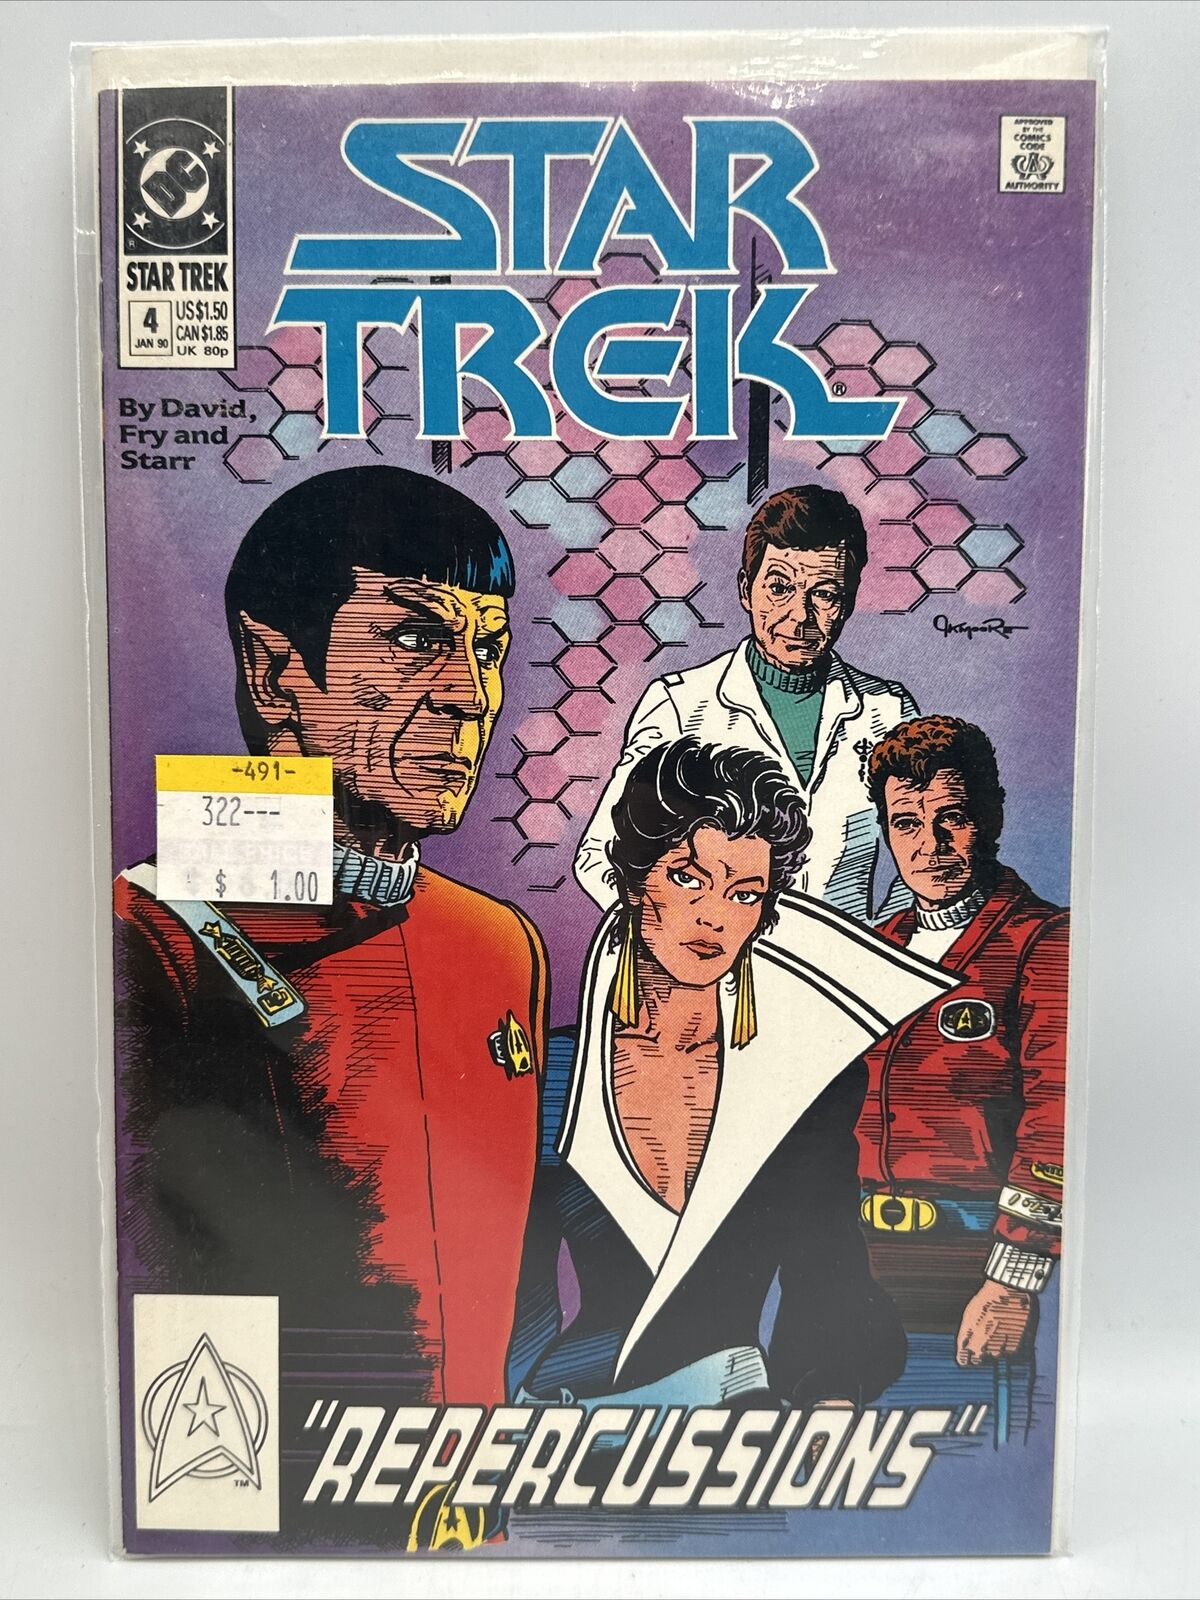 DC Star Trek #4 January 1990 Repercussions Sleeved And Boarded